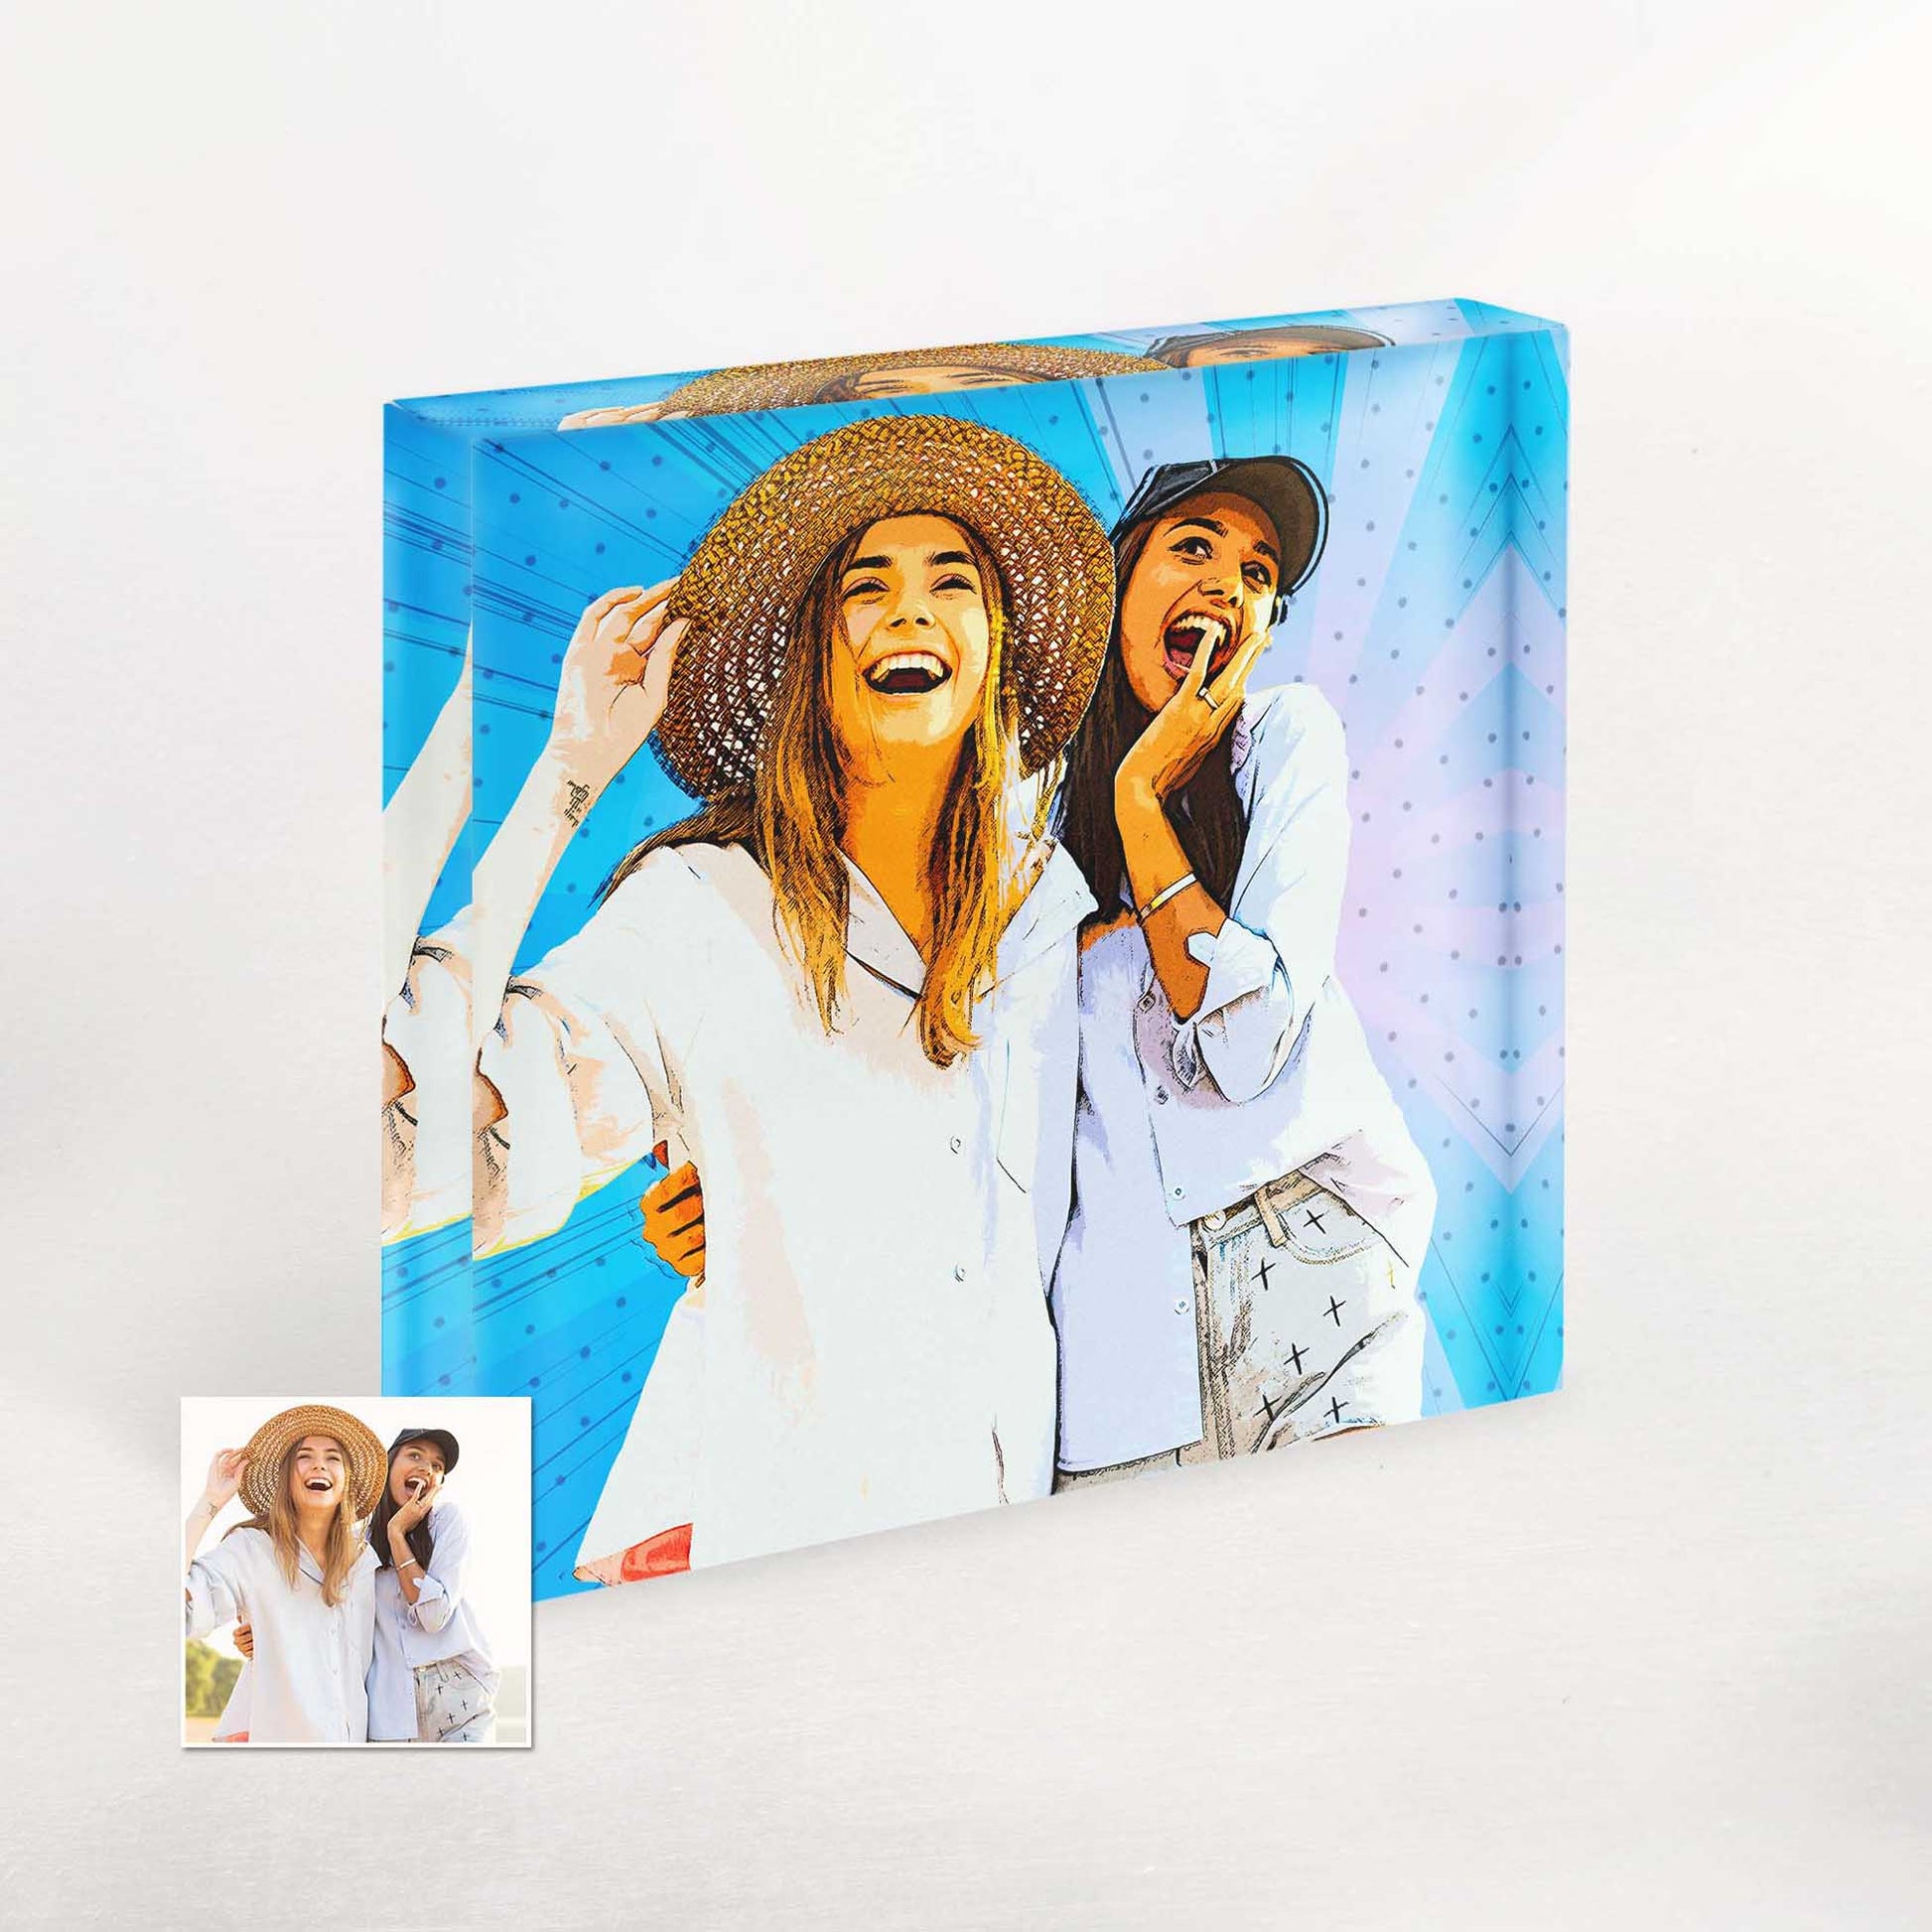 Experience the joy of personalized home decor with our Cartoon Comic Acrylic Block Photo. Its fresh and original artwork brings a sense of fun and happiness, transforming your space into a vibrant and welcoming environment.